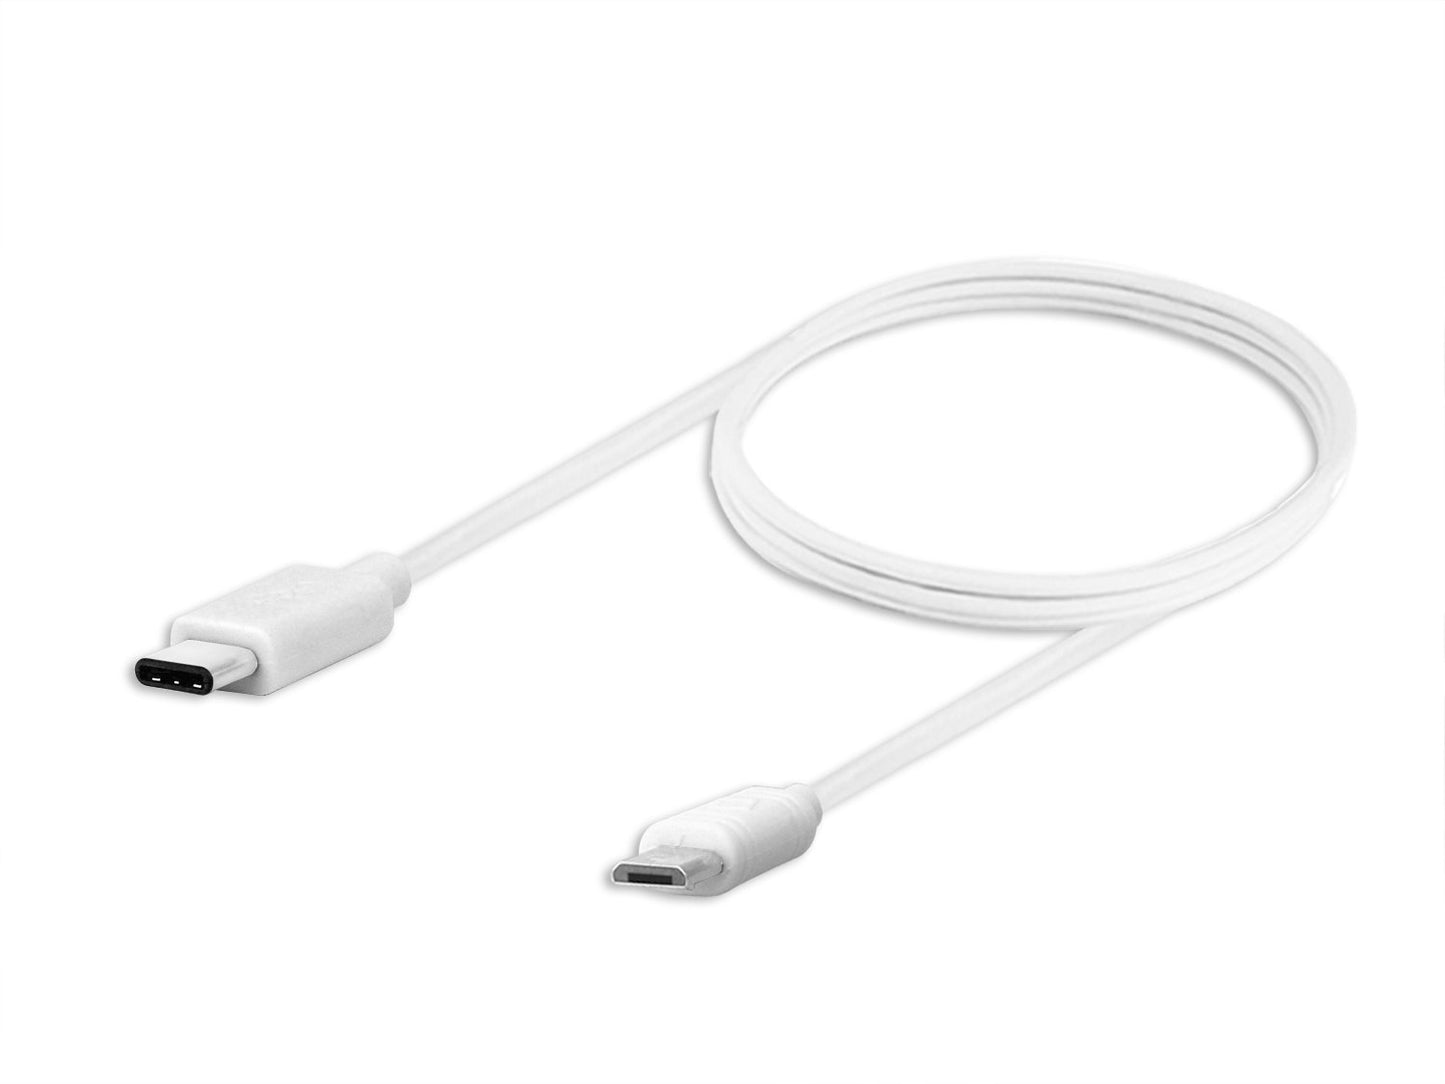 DCMICRO4WT - Cellet Micro USB to USB-C Charging Cable for Smartphones Android Phones